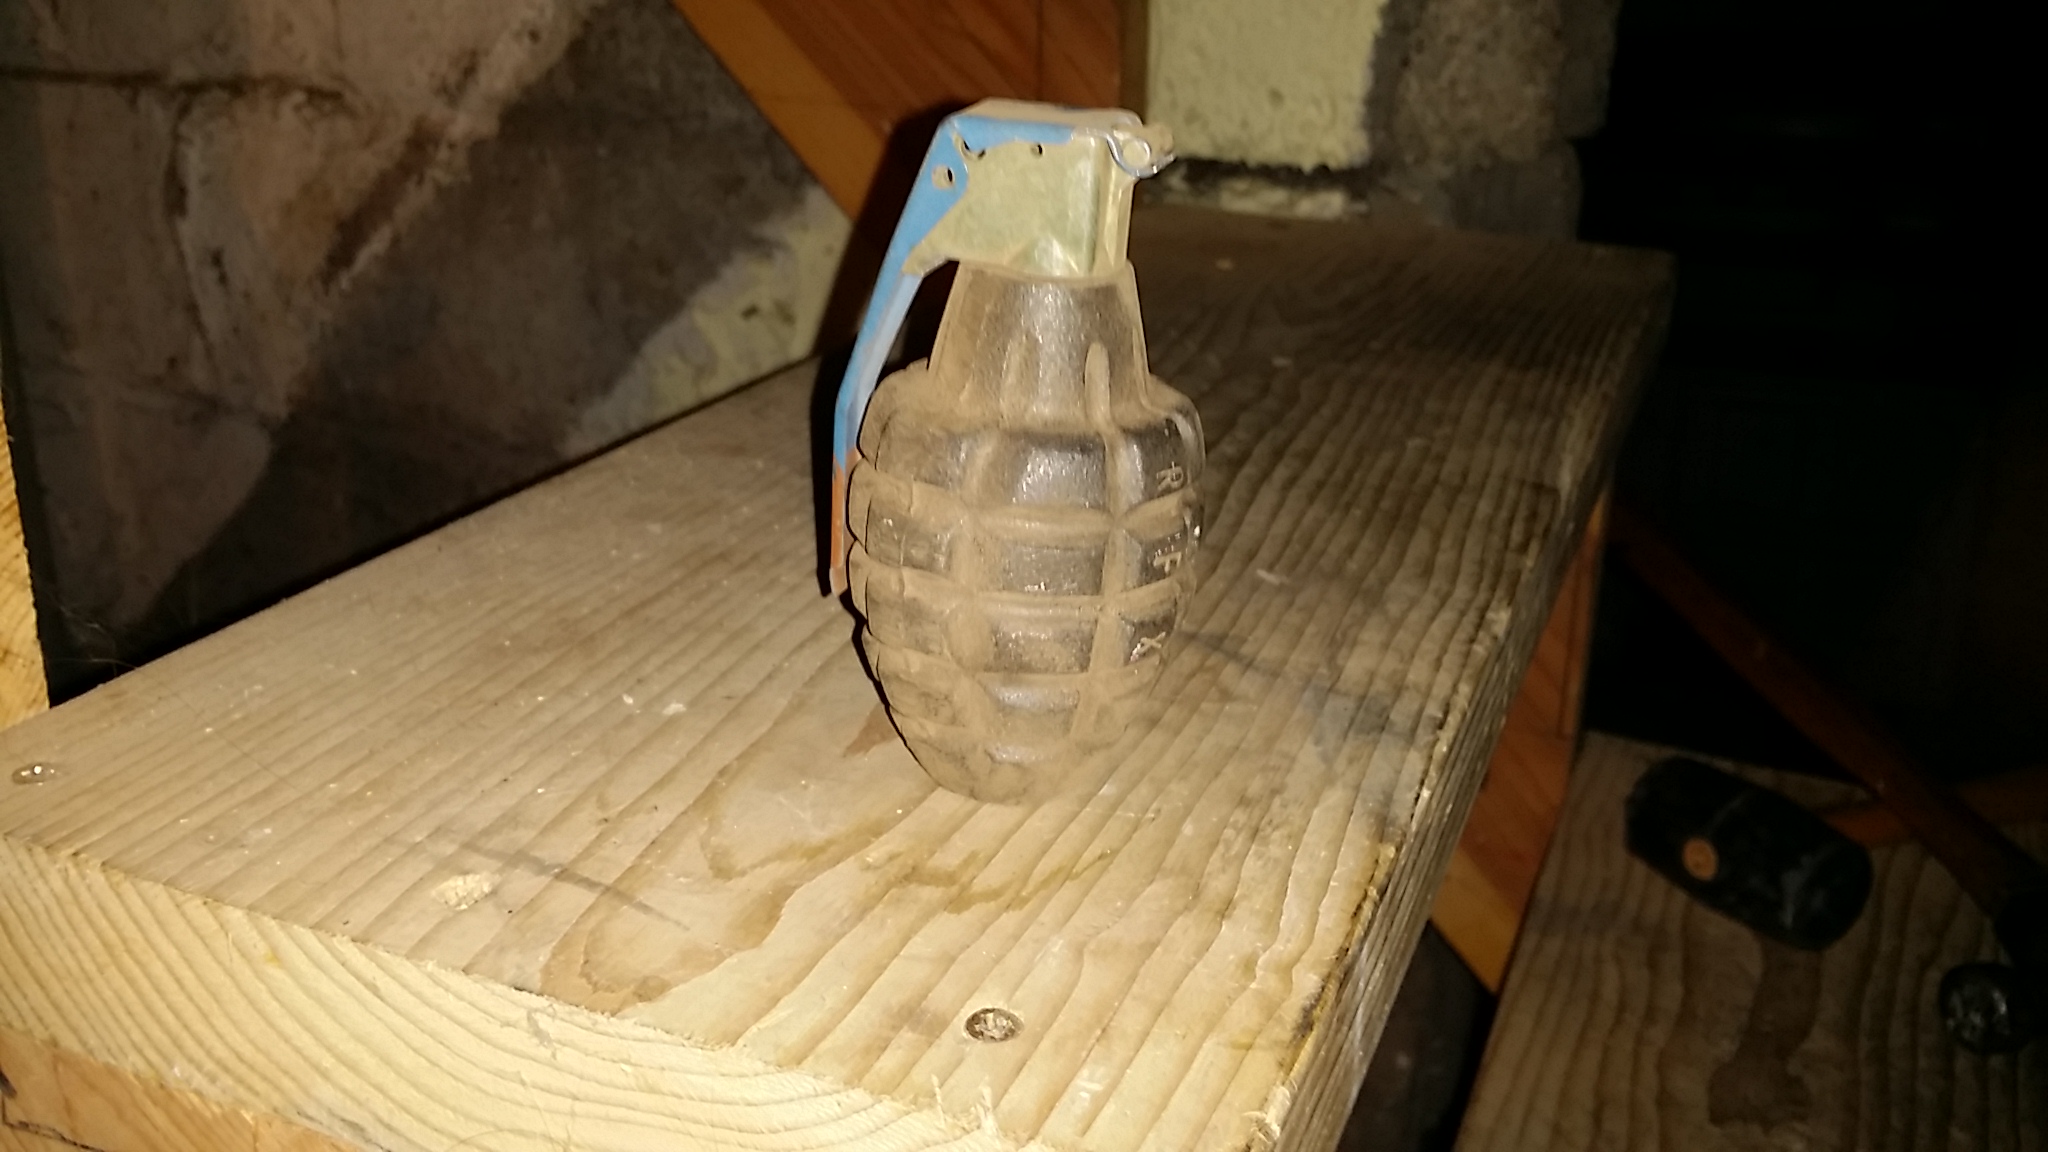 This hollowed out grenade was also there.